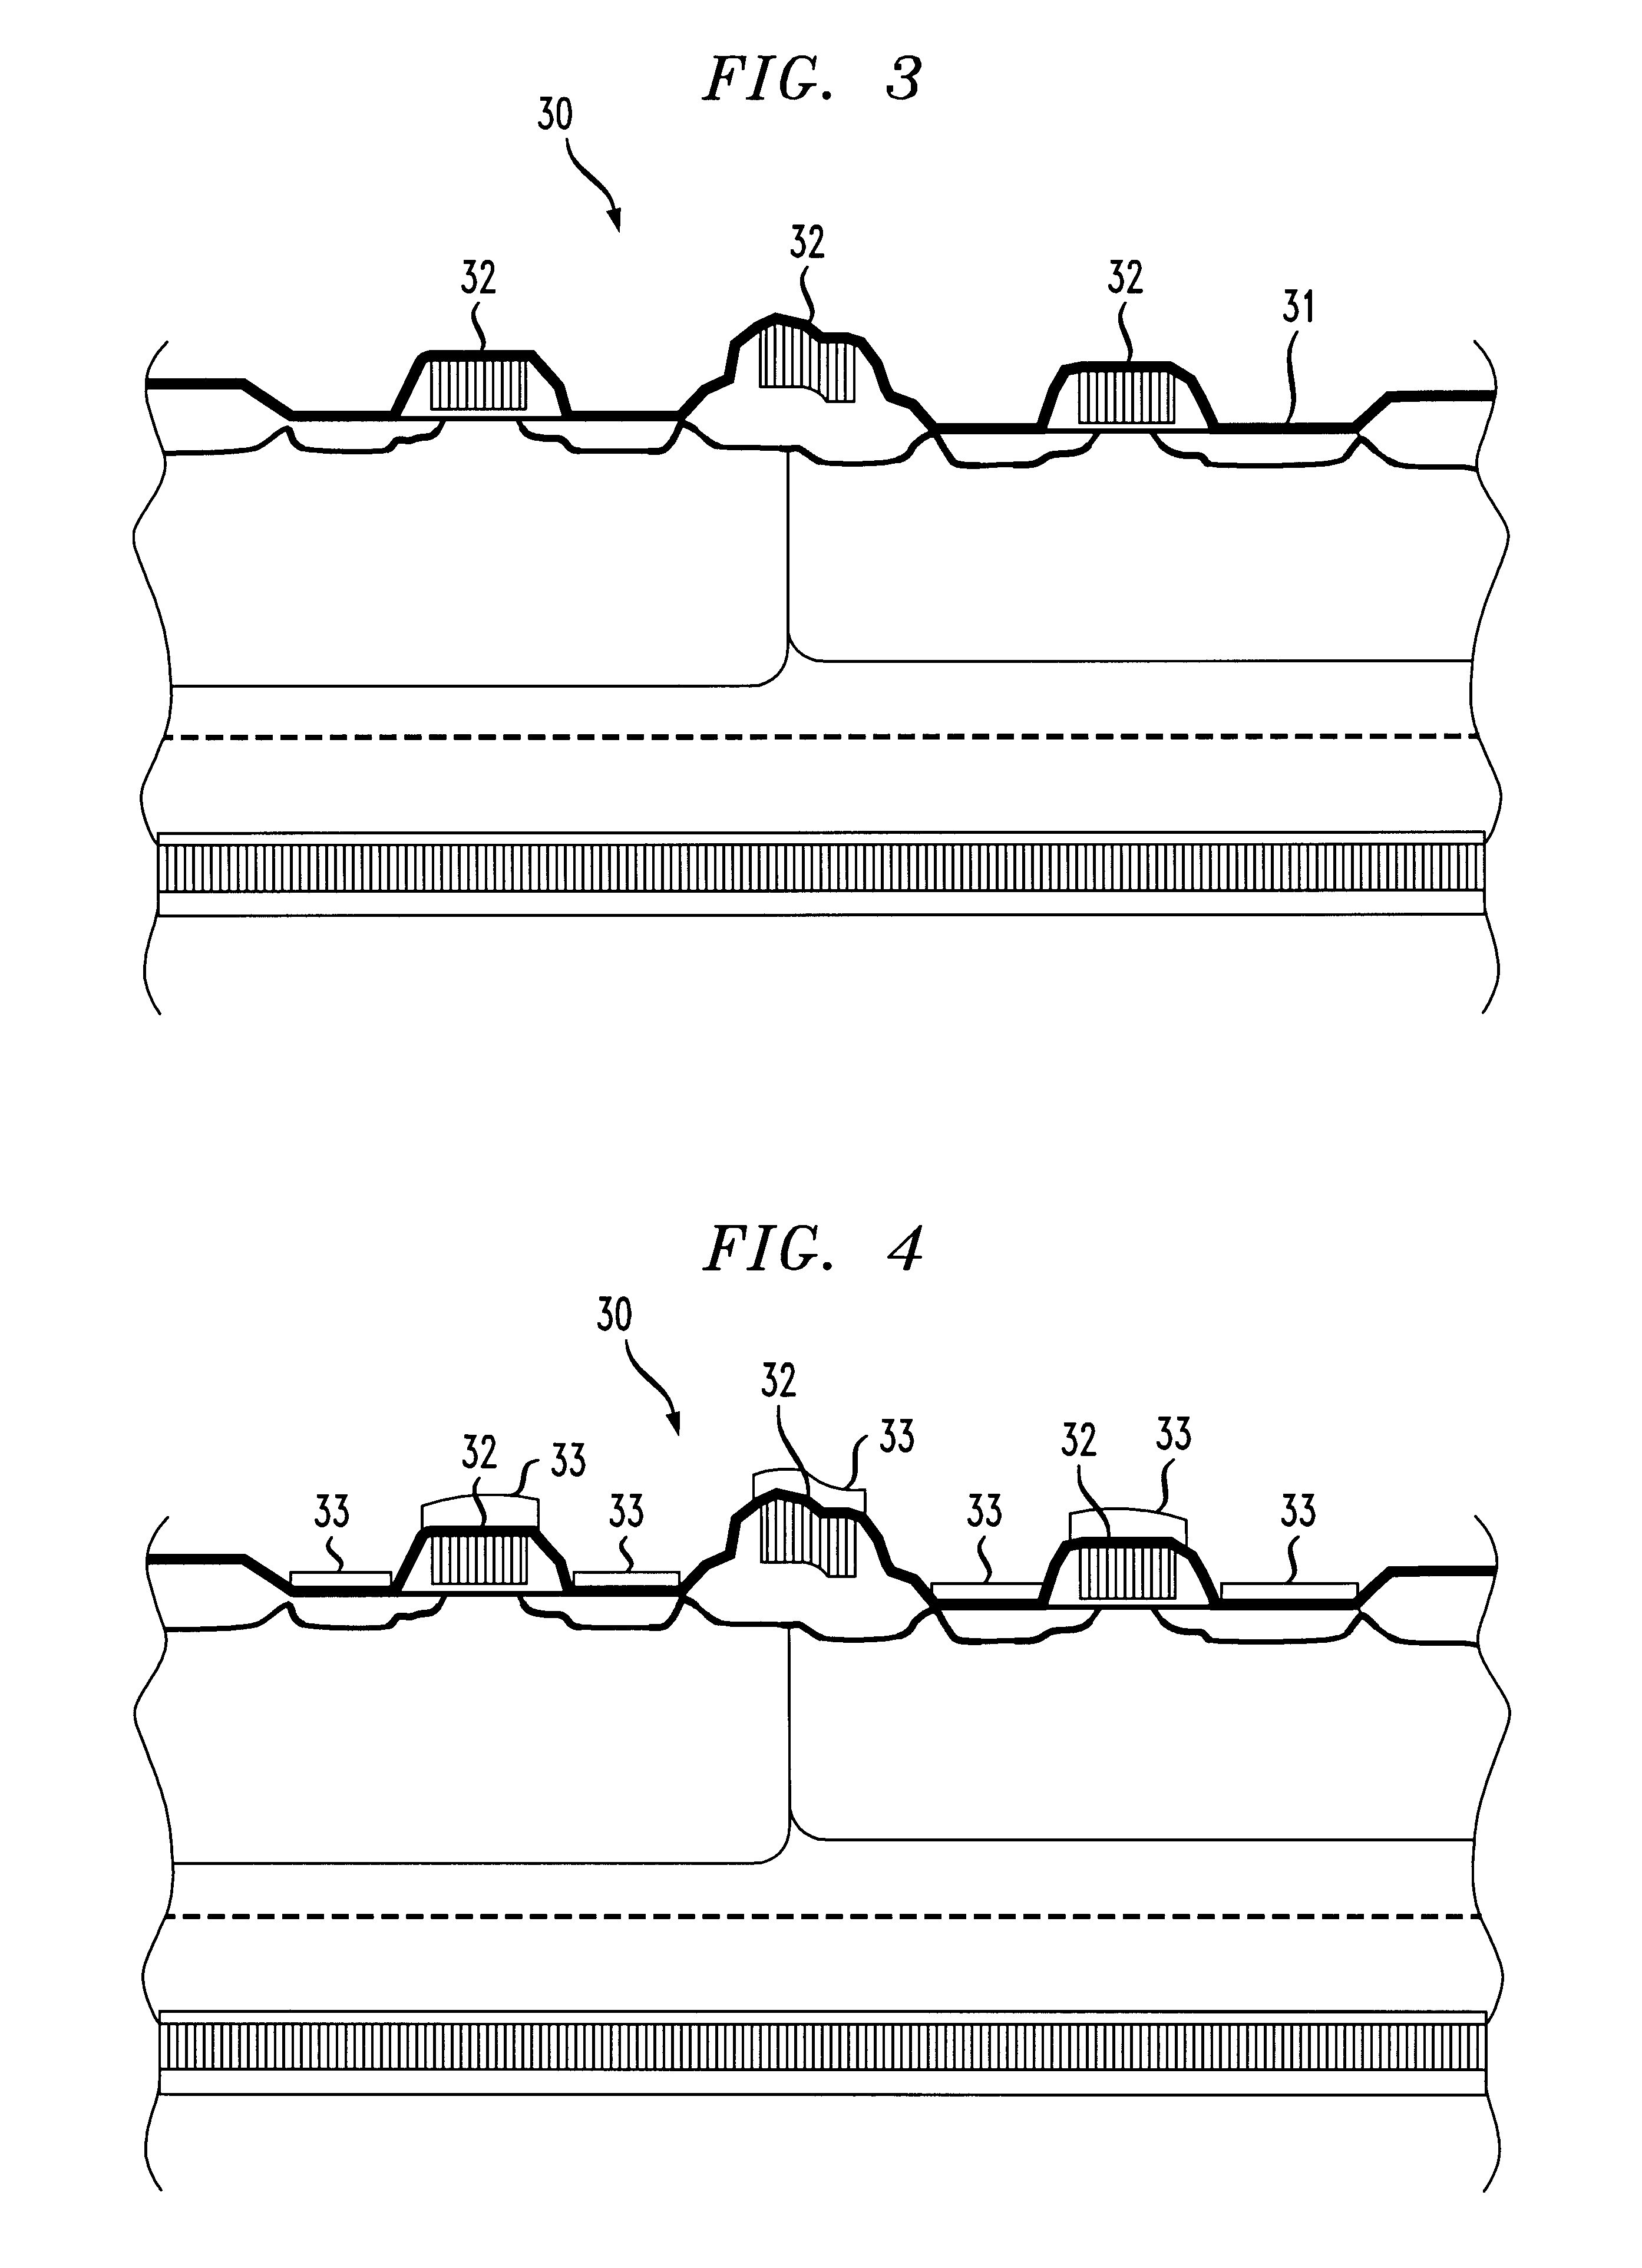 Method to selectively heat semiconductor wafers